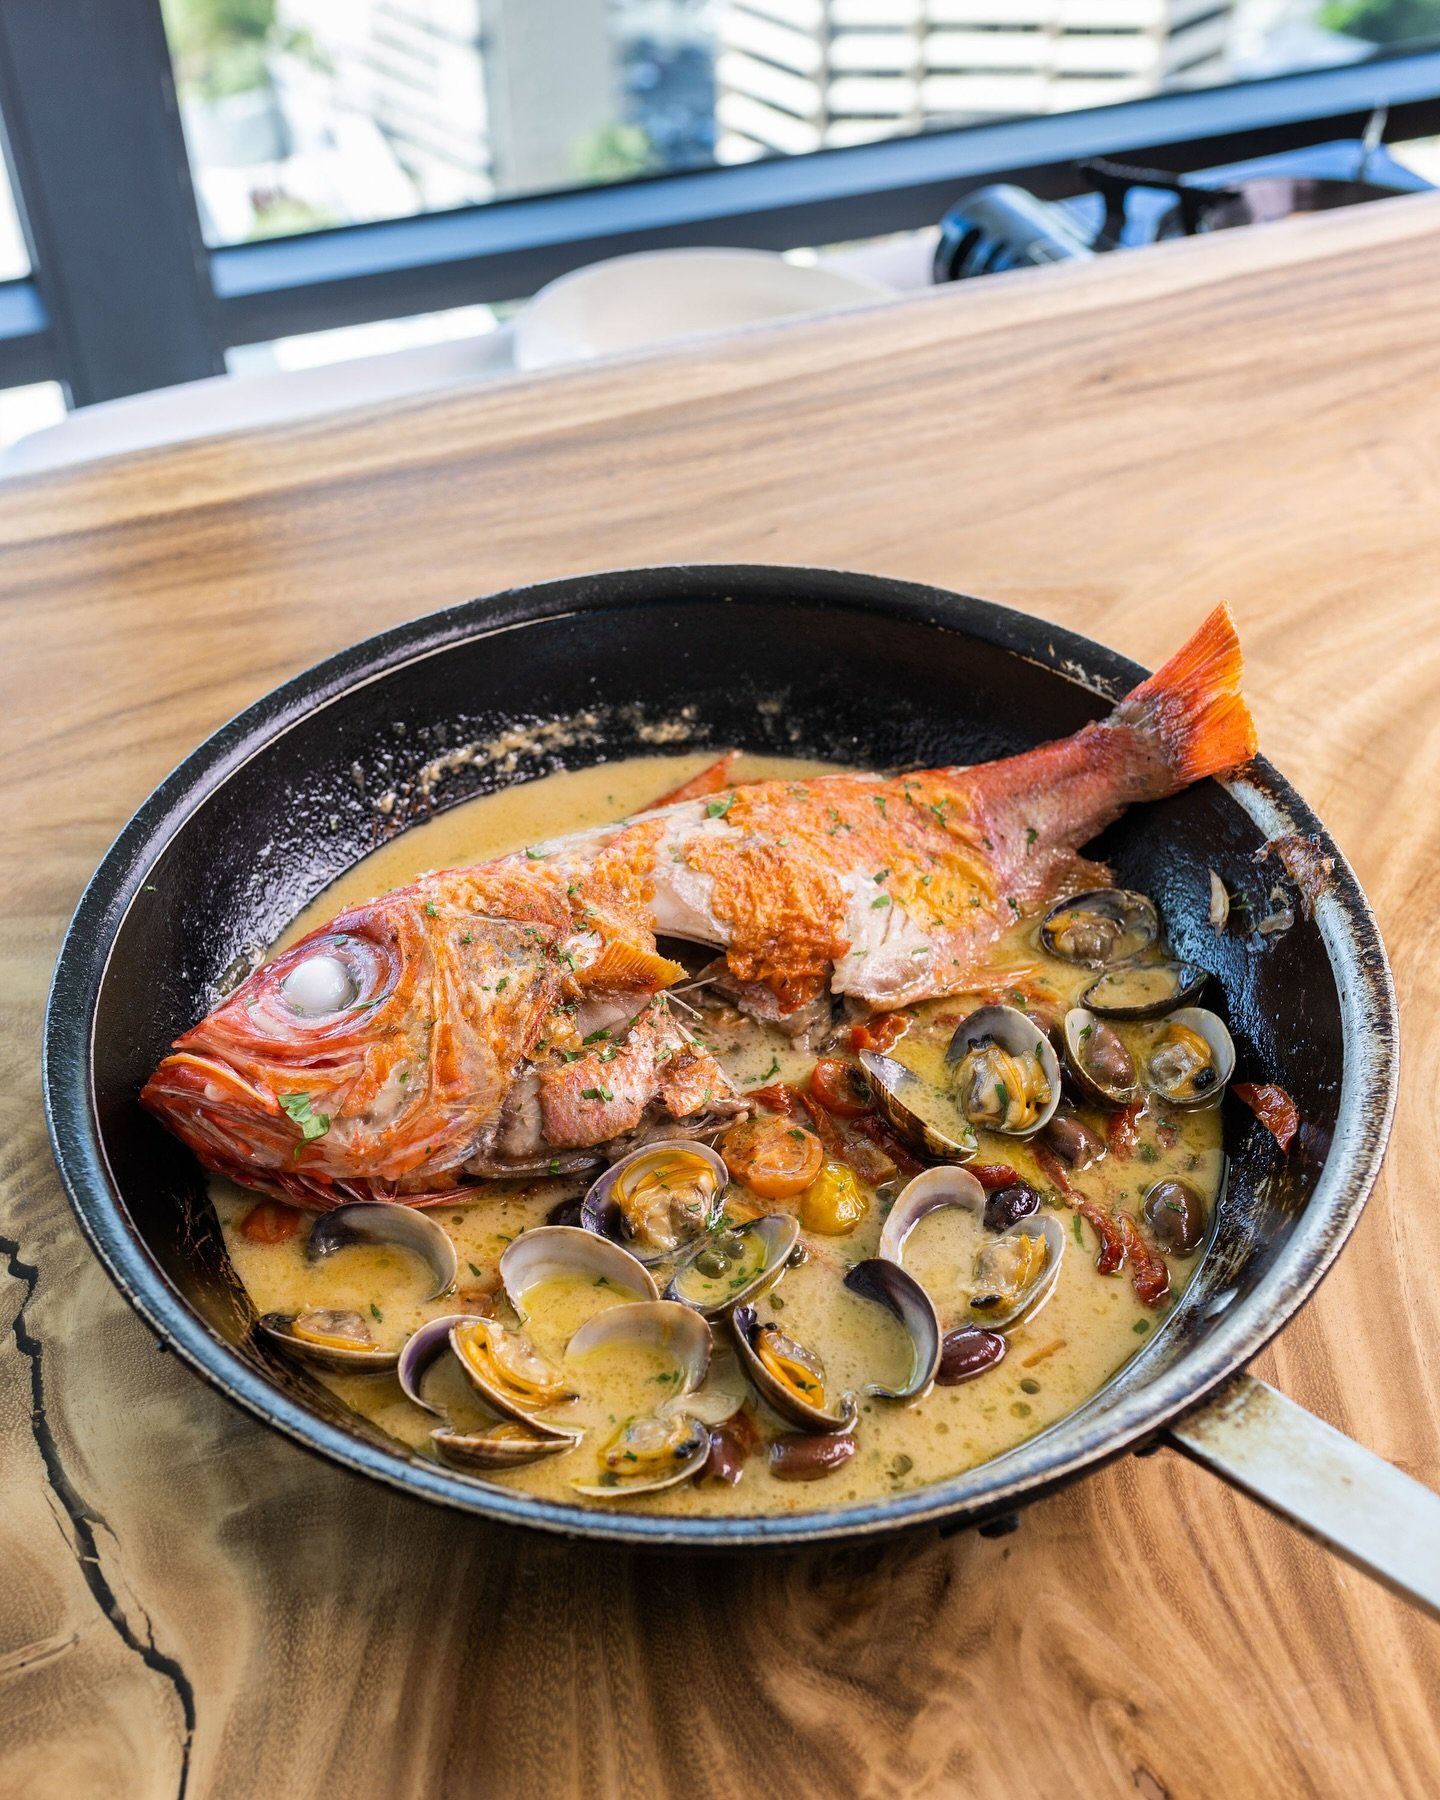 A local favorite, Acqua Pazza, showcases our daily fresh catch from around the world. (Pictured is the Kinmedai 金目鯛 / Golden-eye Snapper) Available on our dinner menu from 3:00pm
- 10:30pm daily!
&bull; Book your reservations today on OpenTable or ca